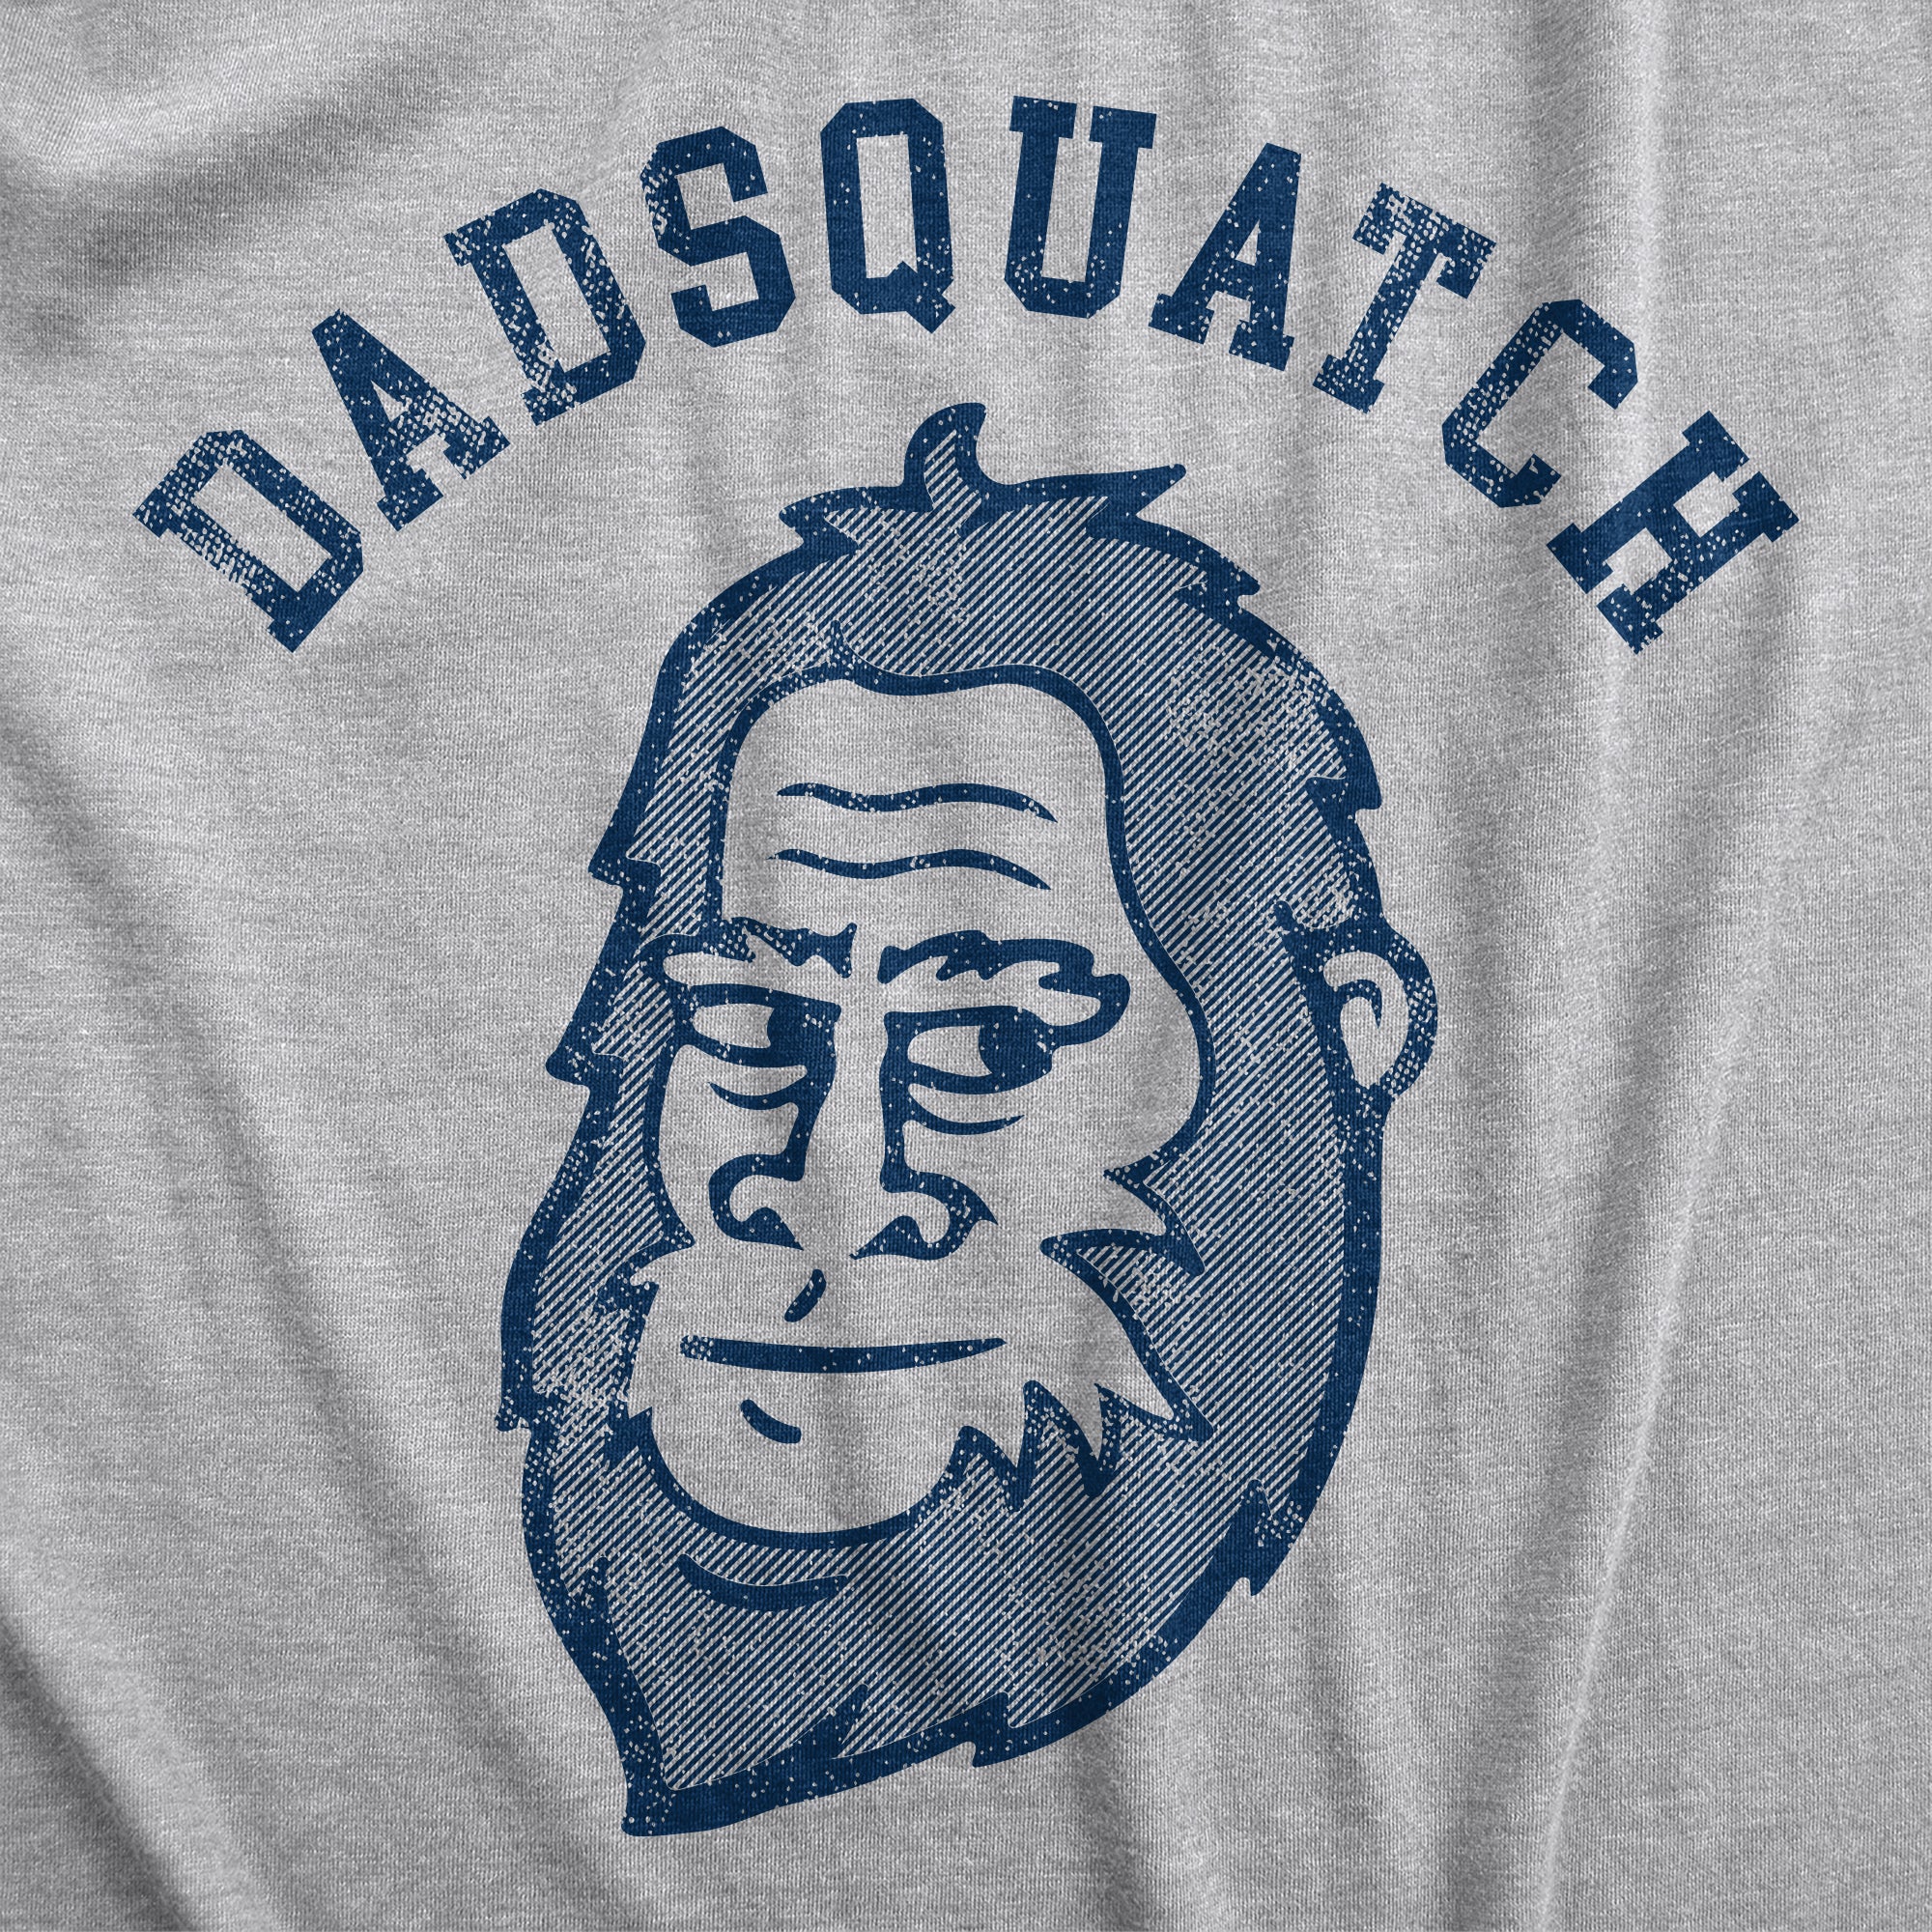 Funny Light Heather Grey - DADSQUACTH Dadsquatch Mens T Shirt Nerdy Father's Day Sarcastic Tee